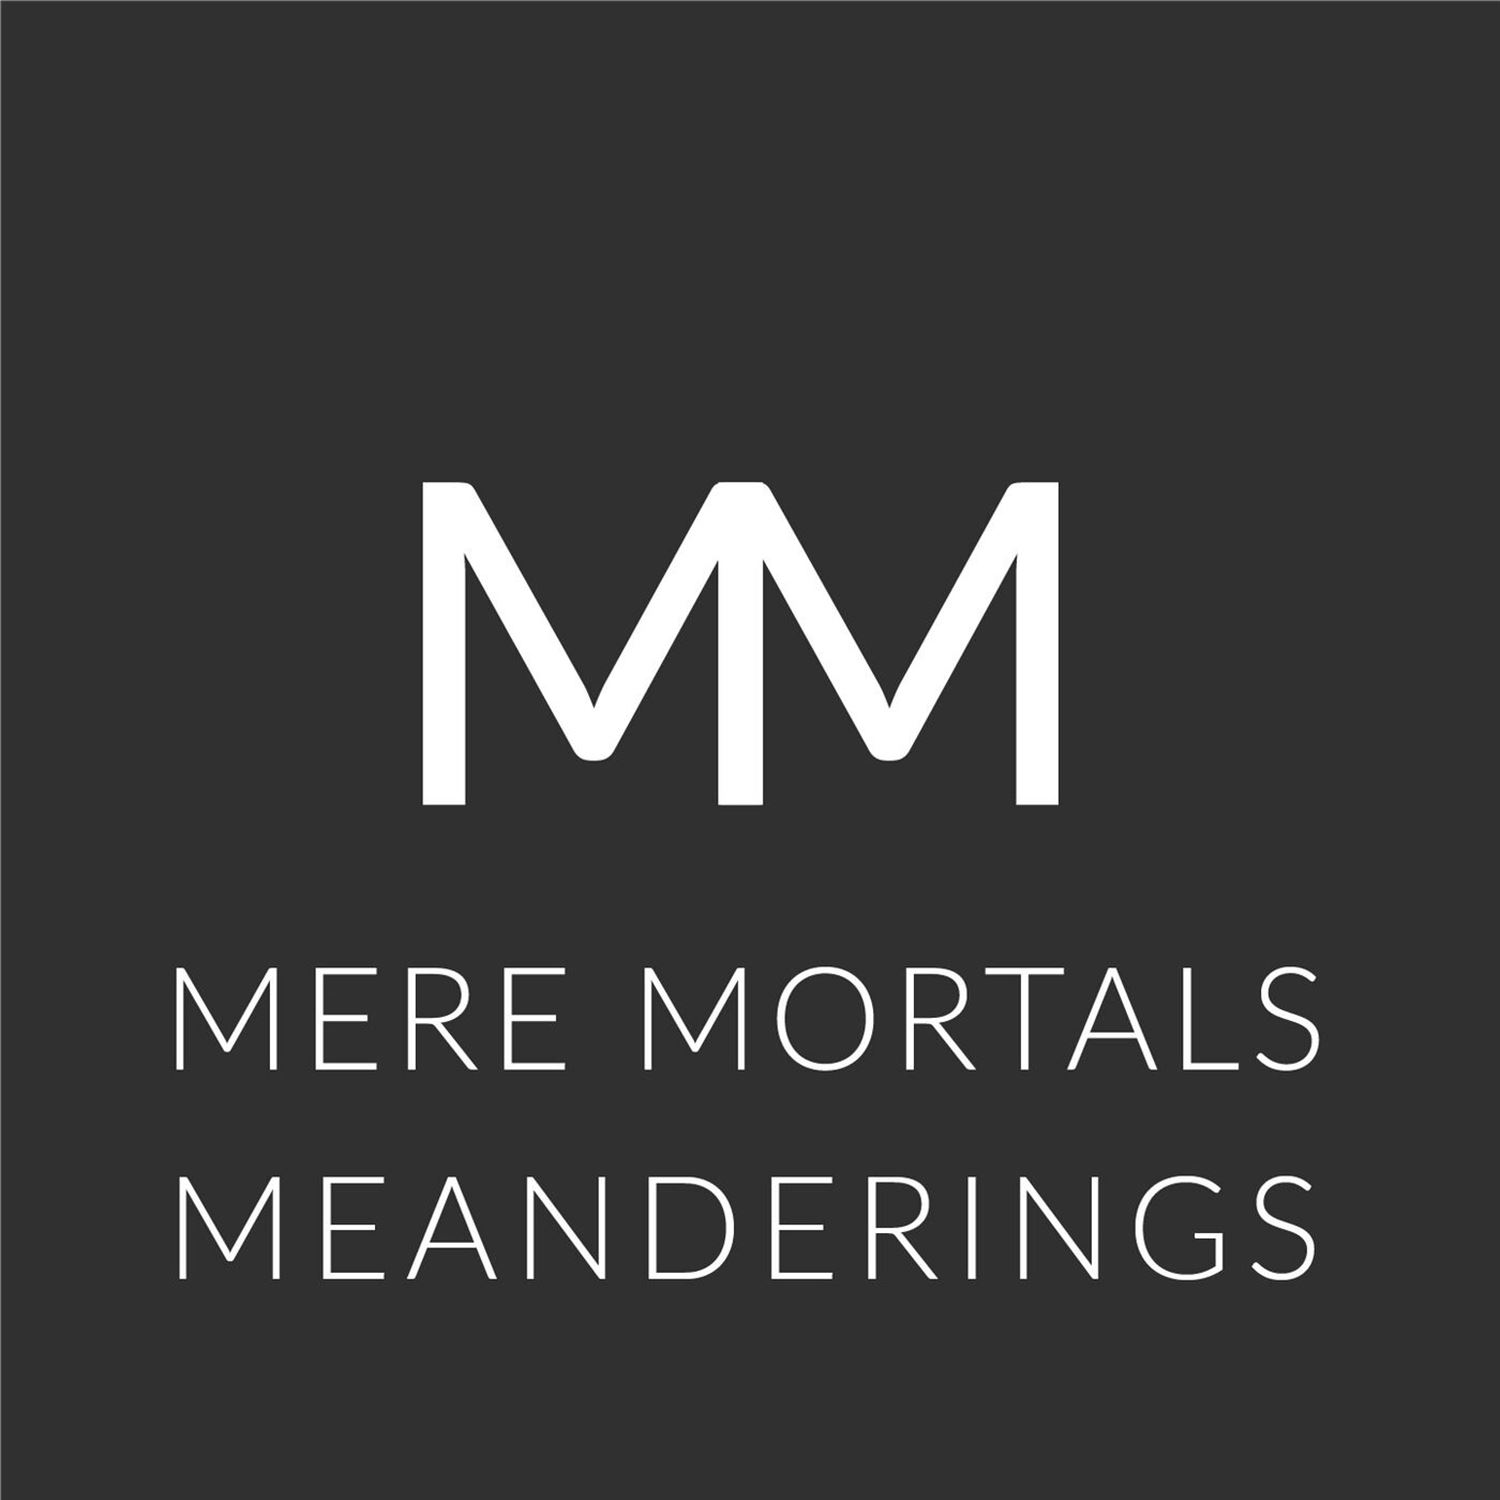 What If Cars Were Sentient? (Mere Mortals Episode #89 - Meanderings)